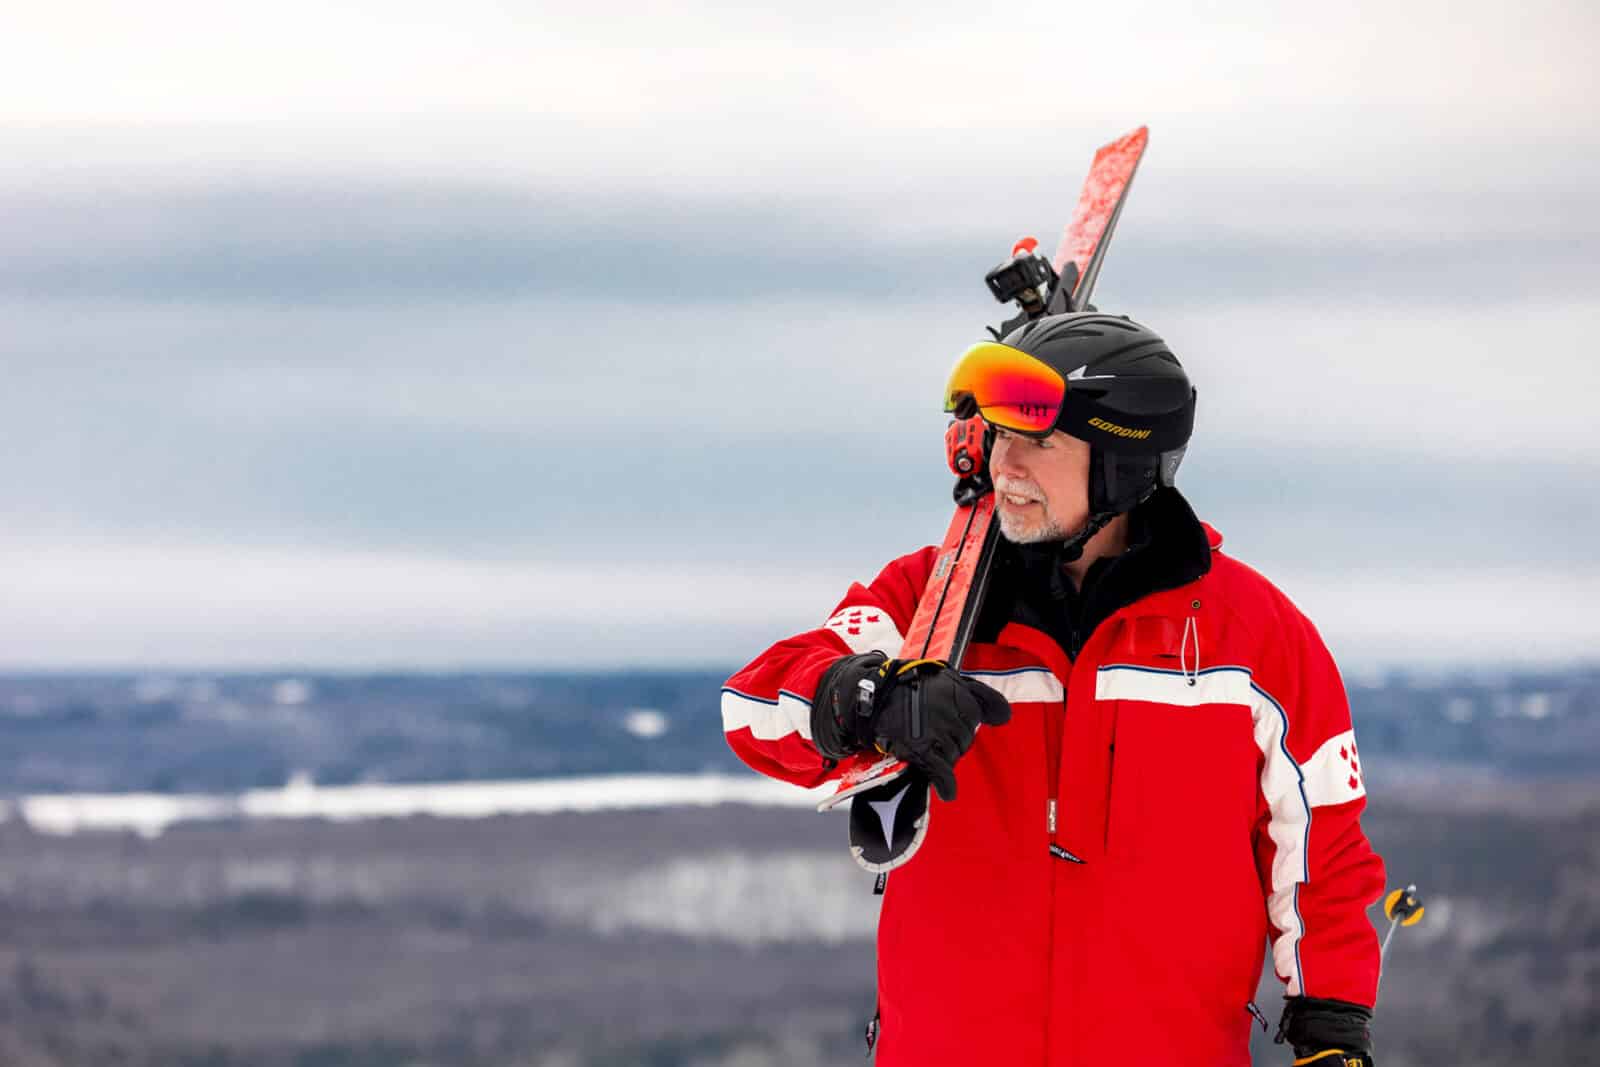 A man stands at the top of a ski hill in winter gear with ski's over his shoulder.